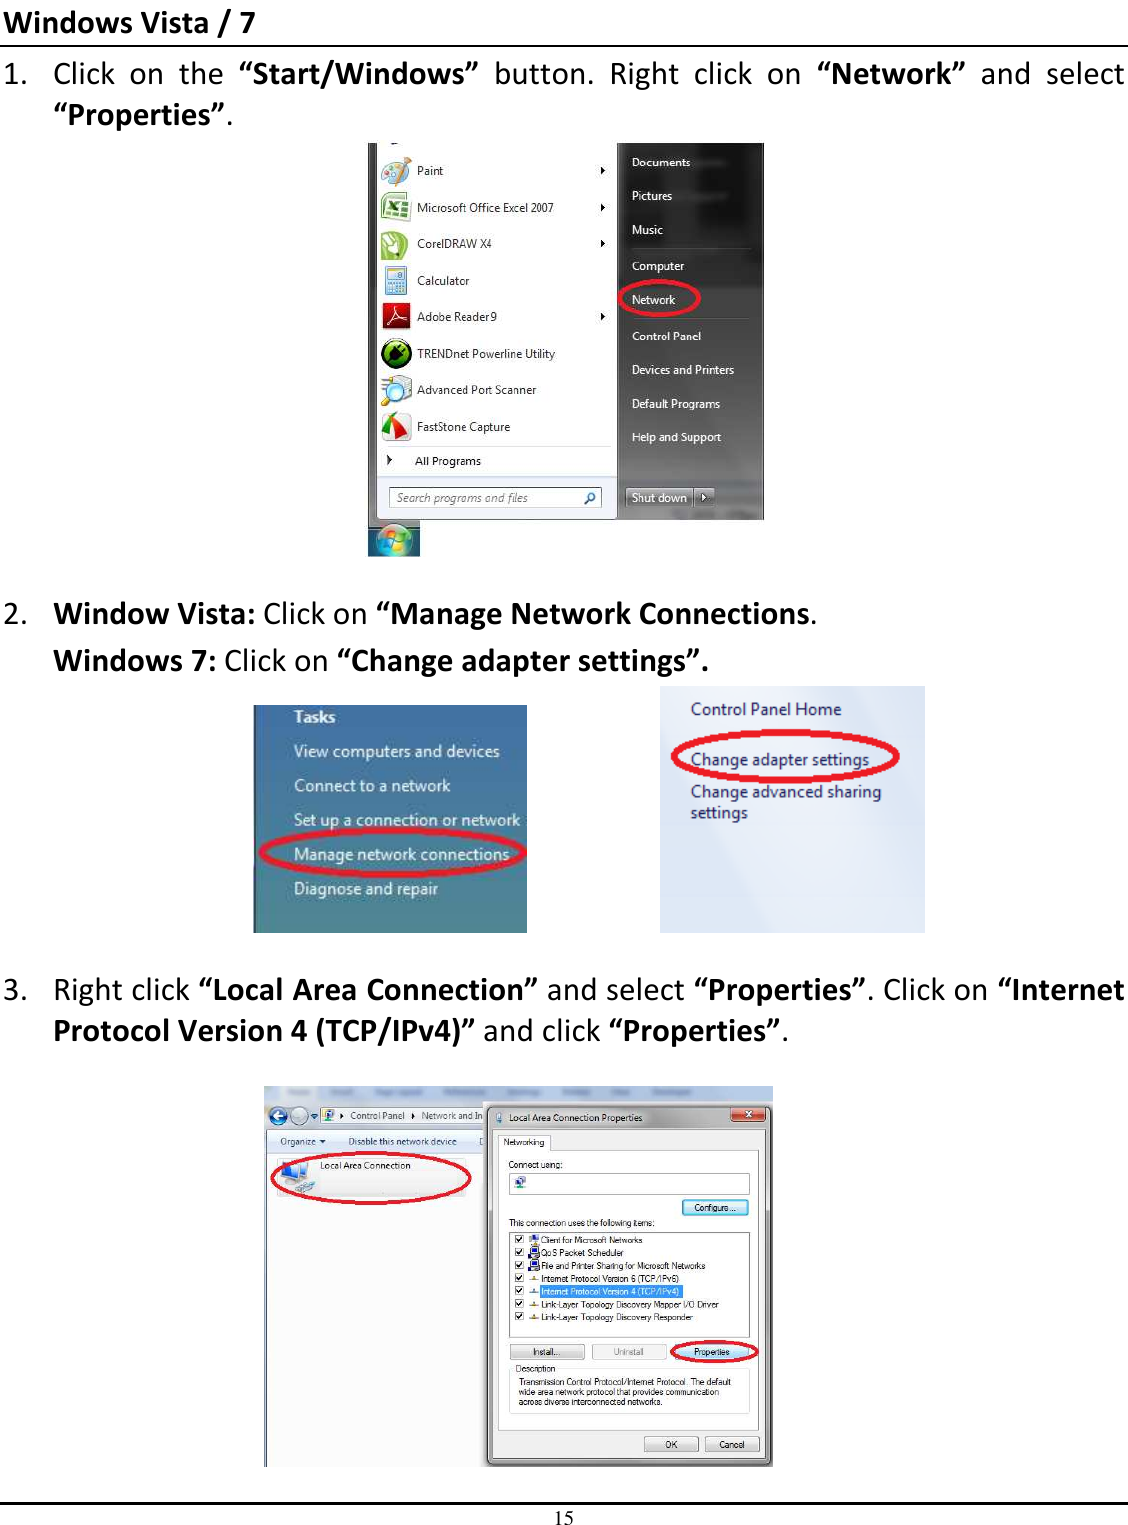 15  Windows Vista / 7 1. Click  on  the  “Start/Windows”  button.  Right  click  on  “Network”  and  select “Properties”.    2. Window Vista: Click on “Manage Network Connections.  Windows 7: Click on “Change adapter settings”.         3. Right click “Local Area Connection” and select “Properties”. Click on “Internet Protocol Version 4 (TCP/IPv4)” and click “Properties”.       